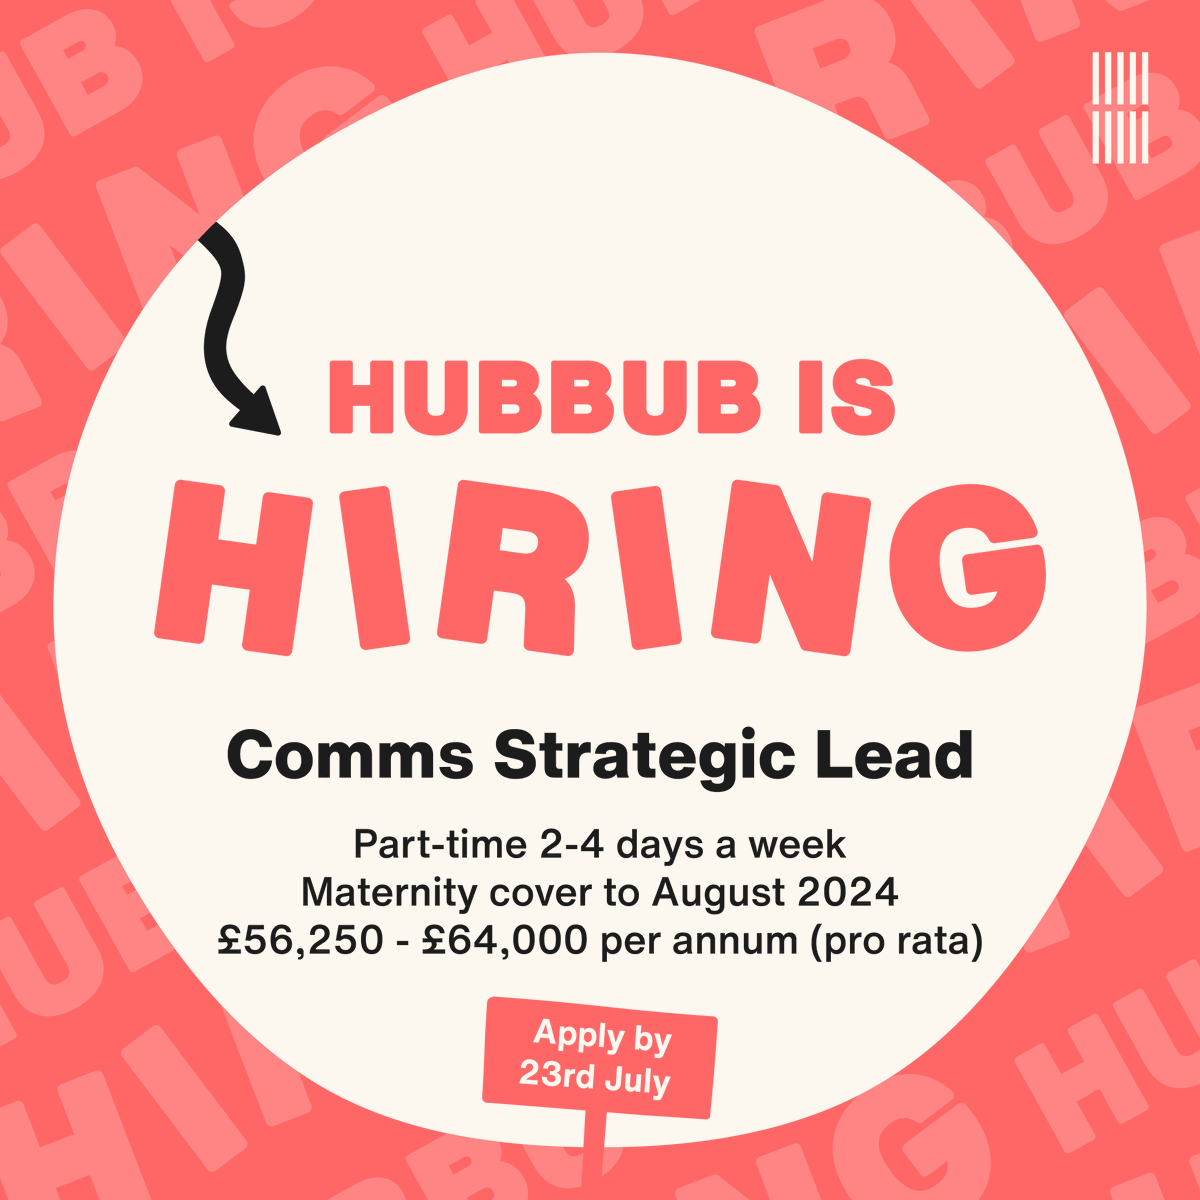 We’re still seeking a Comms Strategic Lead! A new part-time role leading on: ✍🏽 our 2023-24 comms strategy ✍🏽 branding and comms across our many environmental campaigns ✍🏽 strategic direction for our design and comms team Head here to apply: hubbub.org.uk/job-opportunit… #charityjob